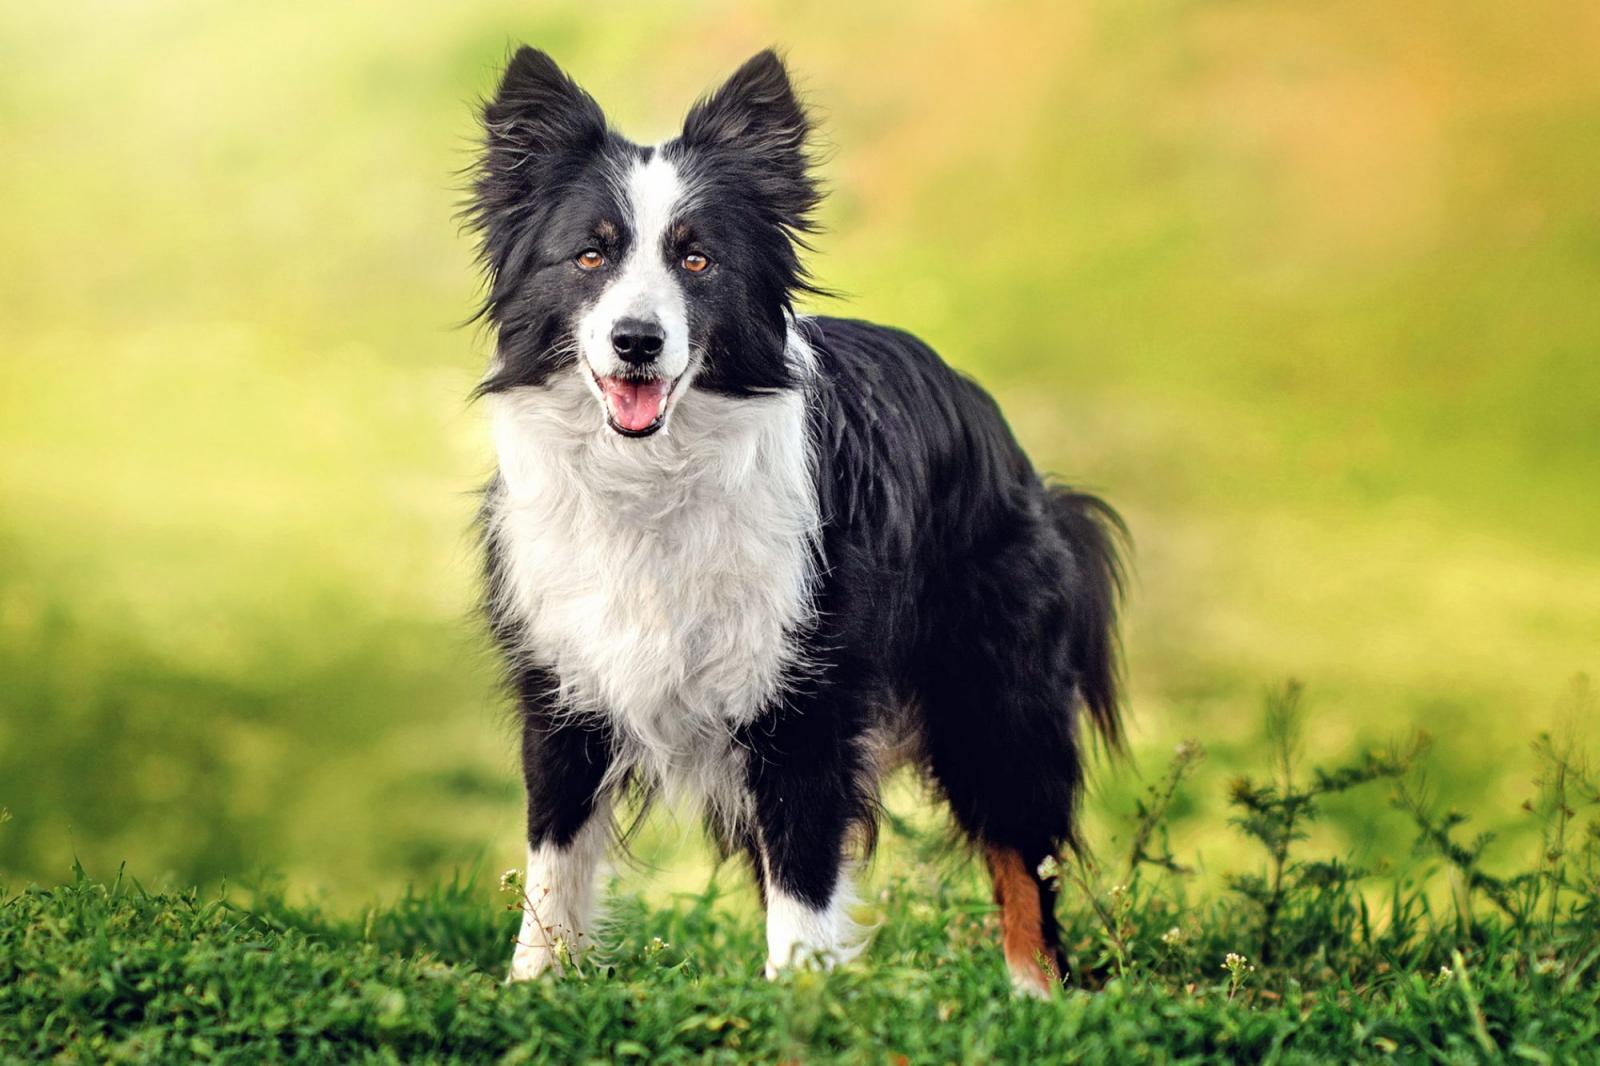 Only the Biggest Dog Lovers Can Identify All 20 of These Breeds 🐾 — Can You? Border Collie